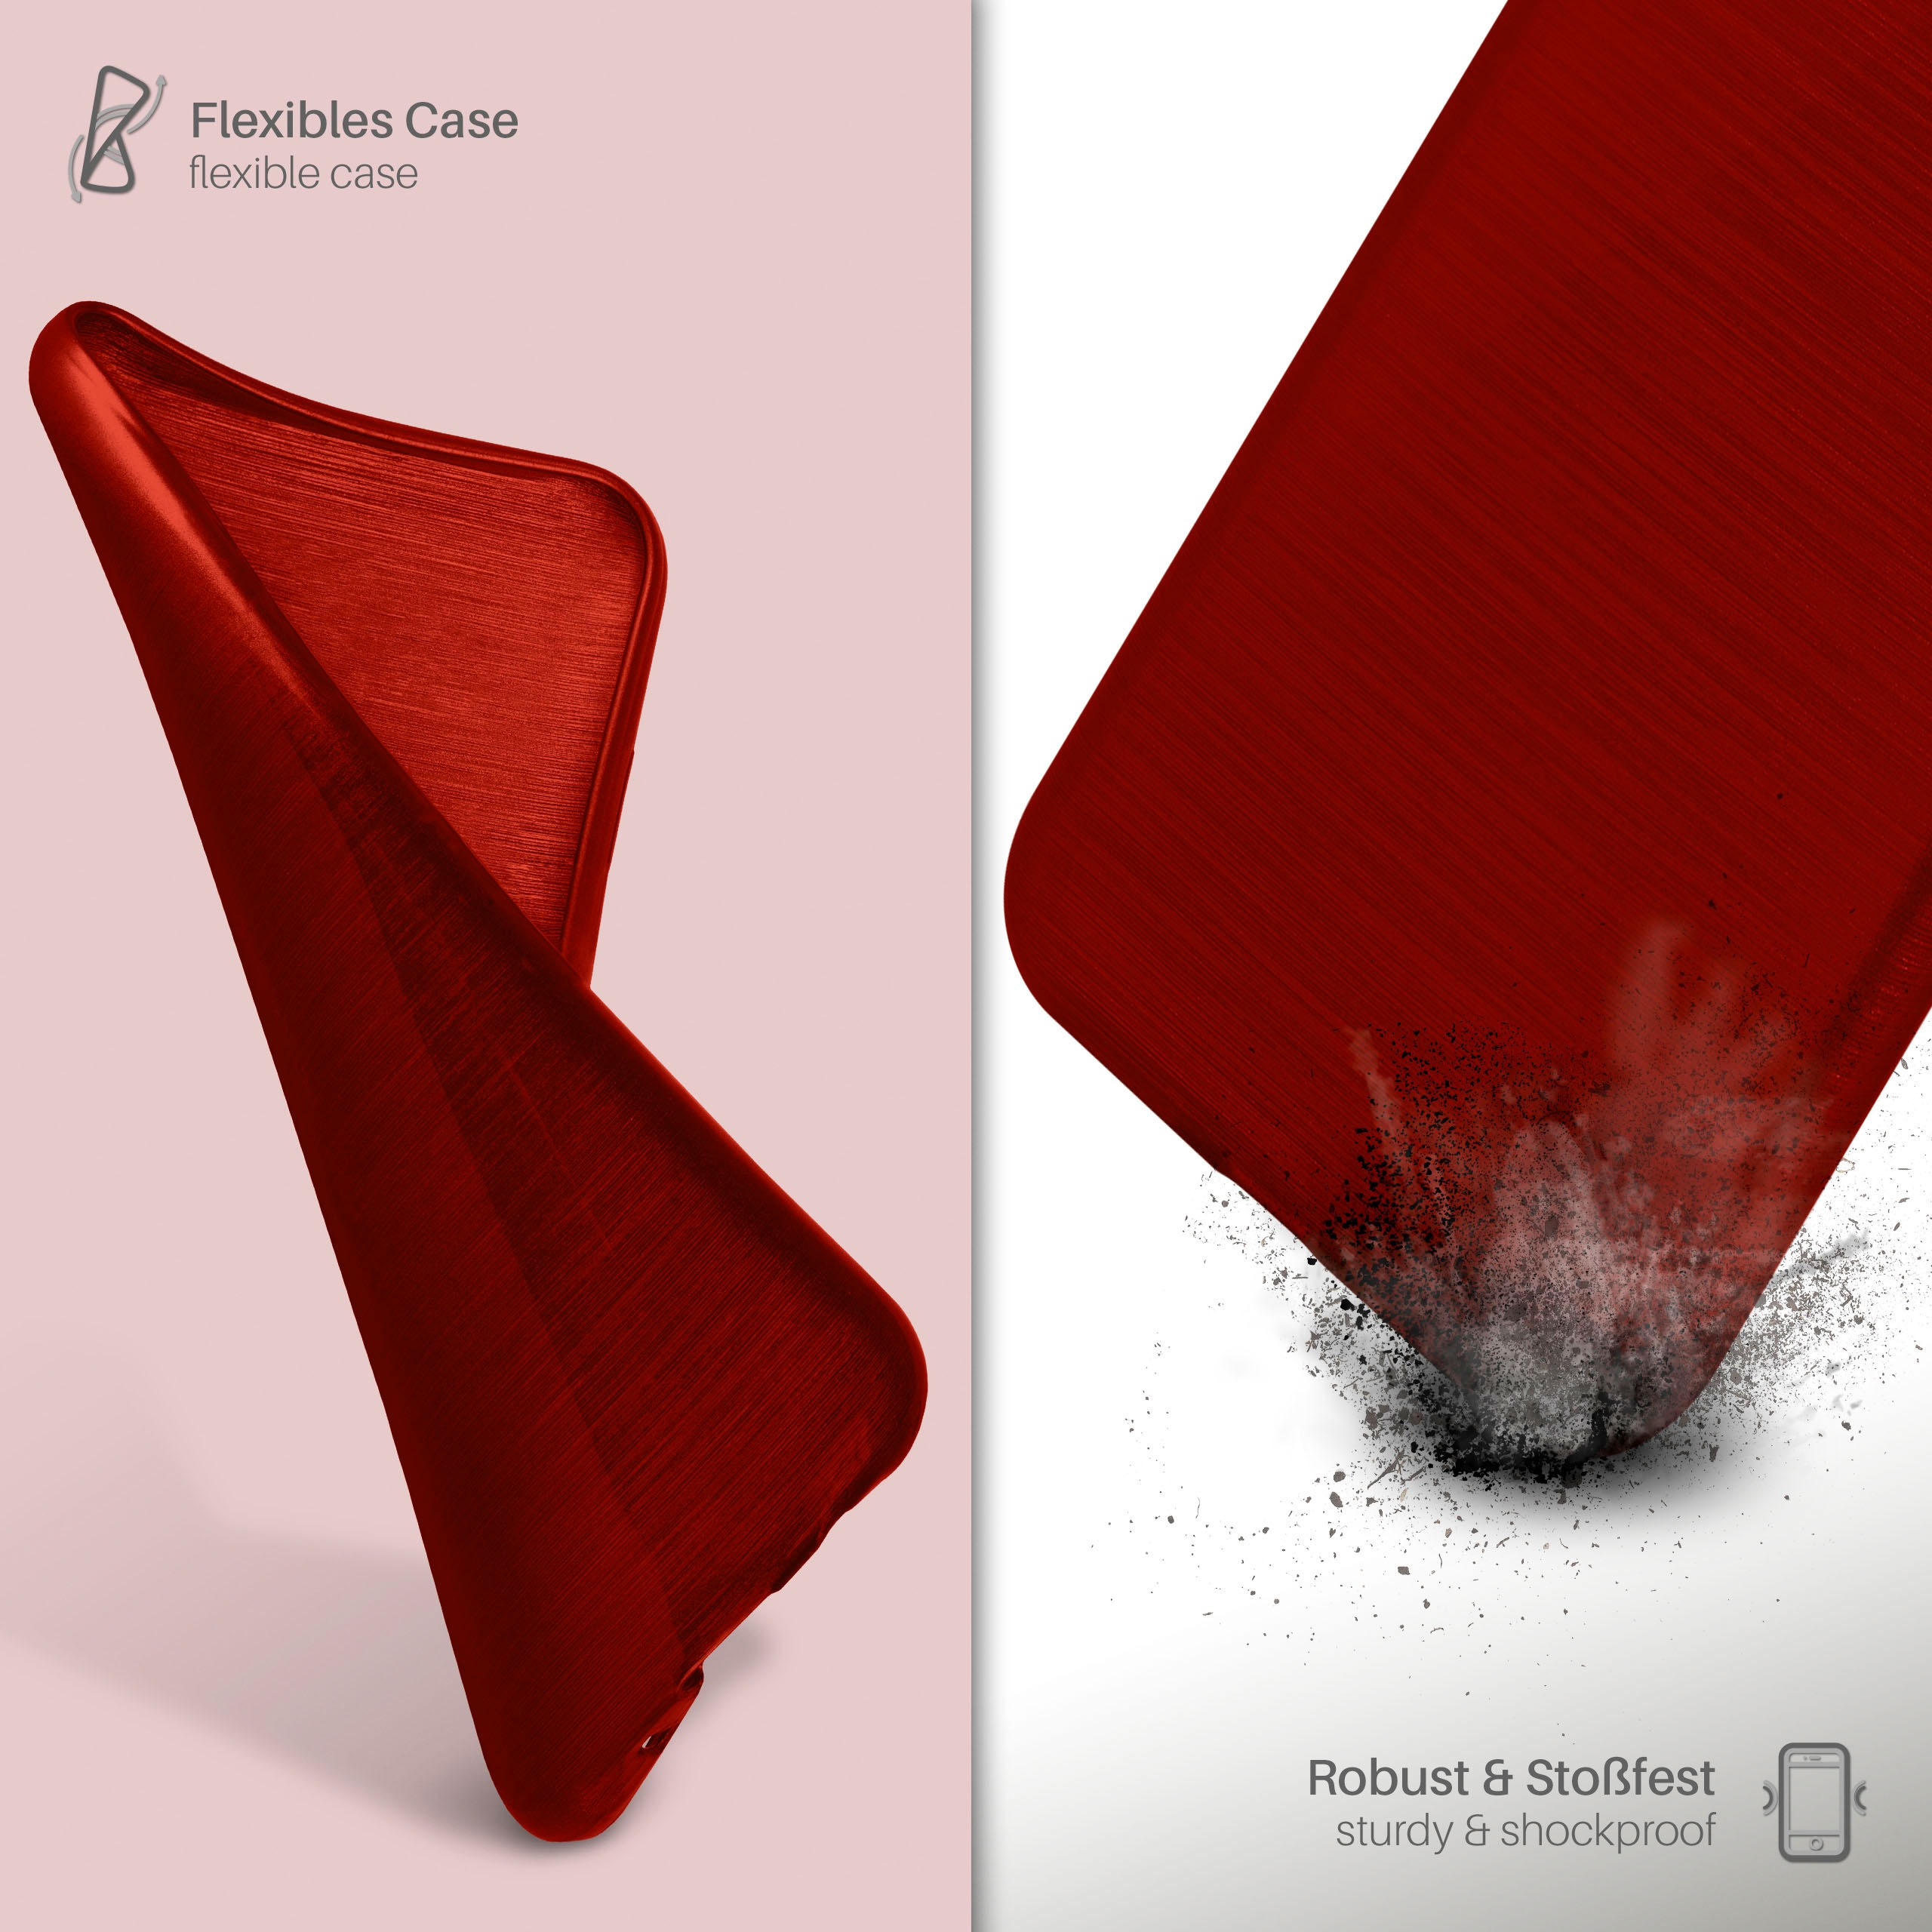 MOEX Brushed Case, Backcover, Crimson-Red 4, / iPhone Apple, 4s iPhone